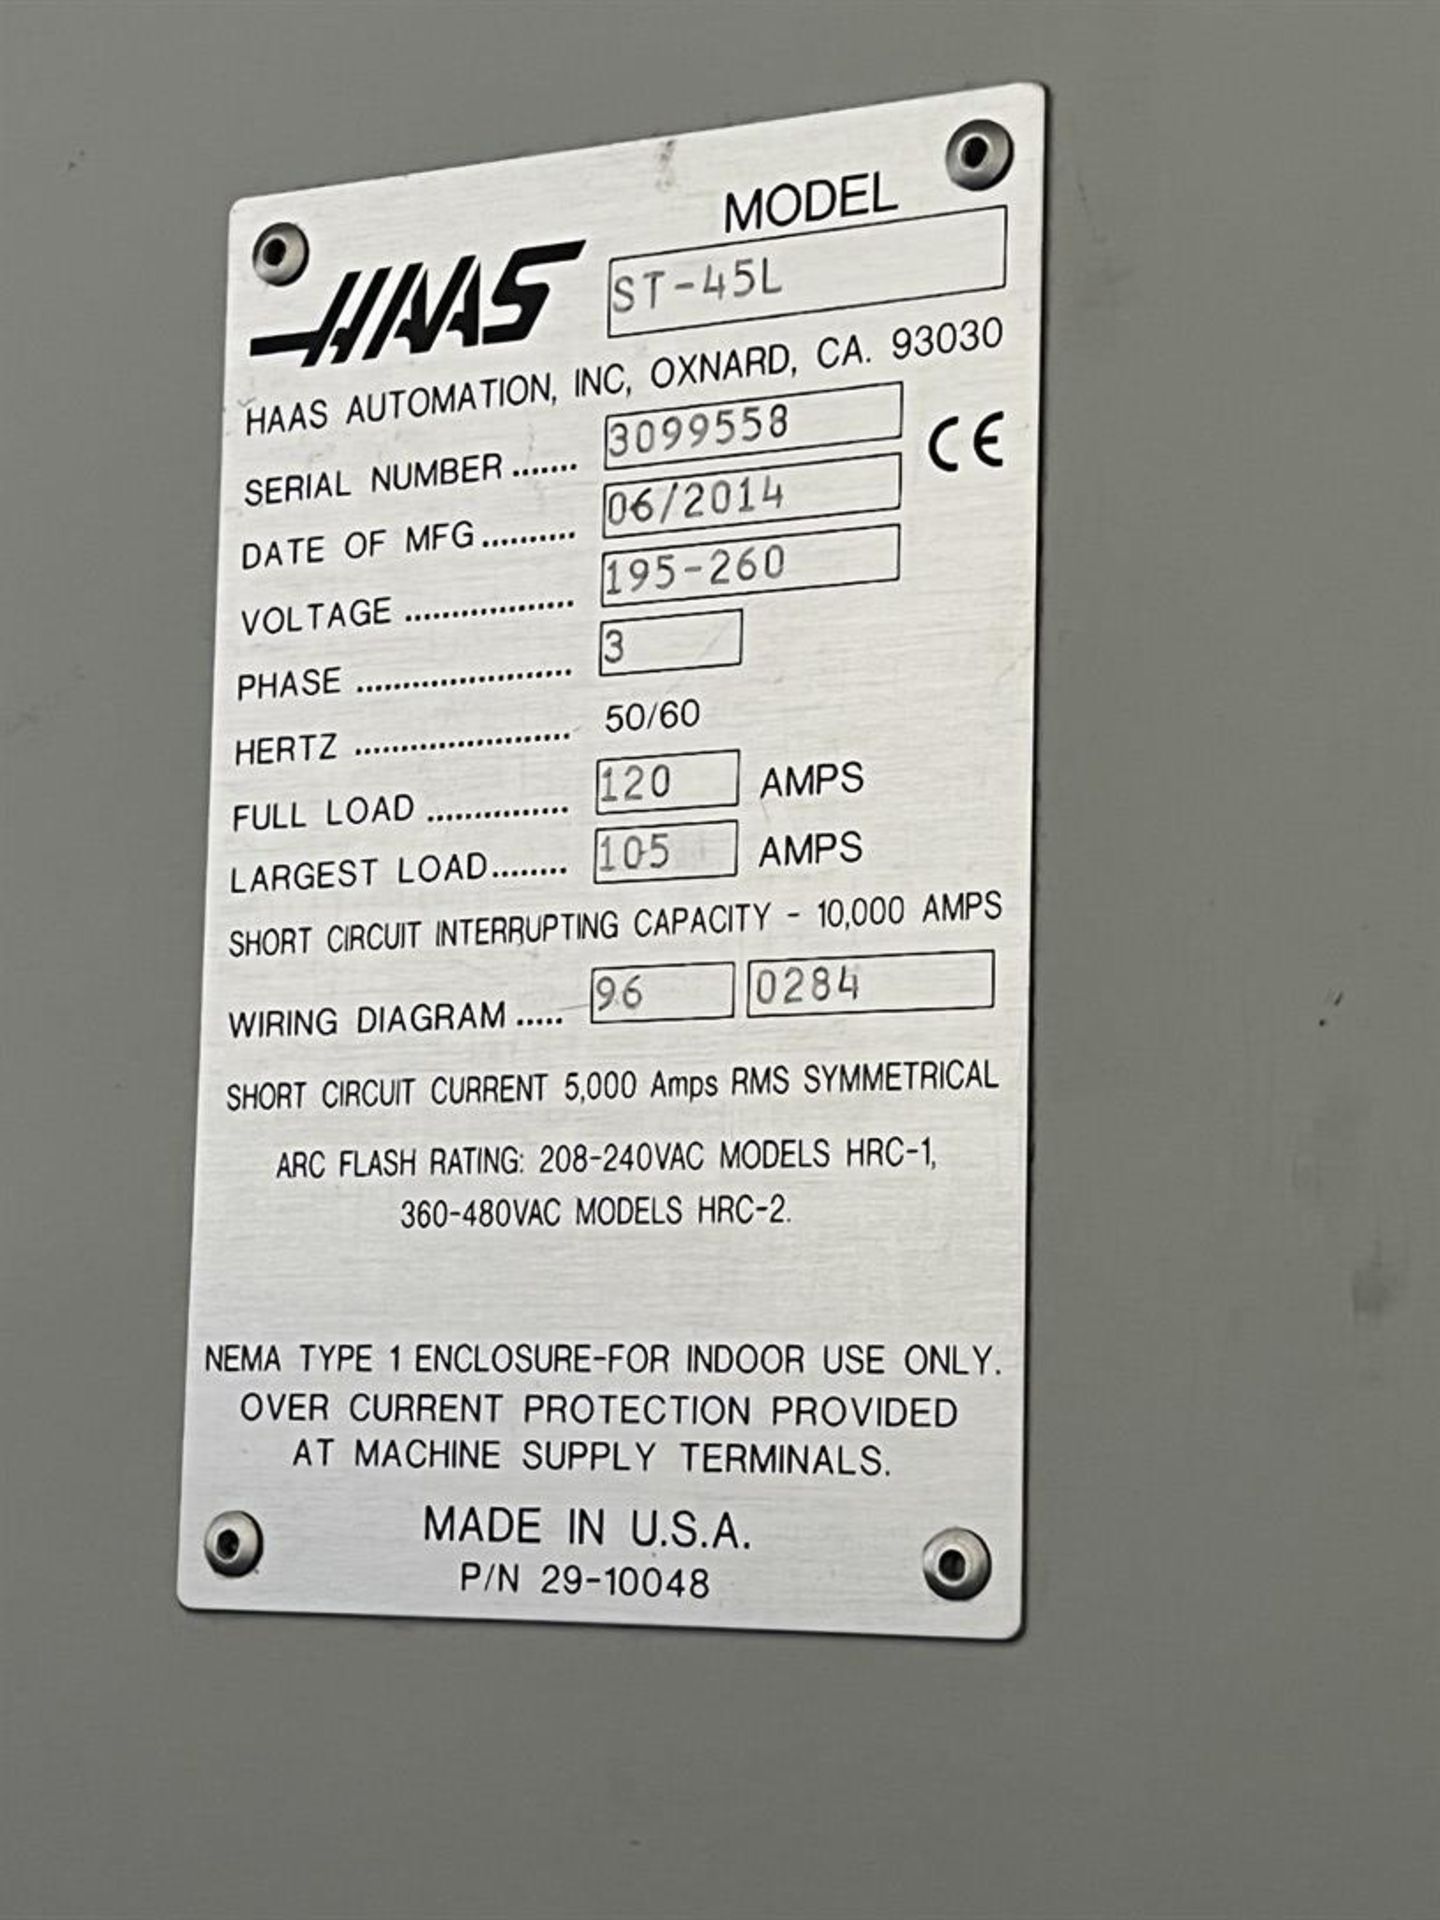 2014 HAAS ST-45L Turning Center, s/n 3099558, HAAS CNC Control, 19.5" SMW Autoblok 3-Jaw Chuck, 12- - Image 11 of 11